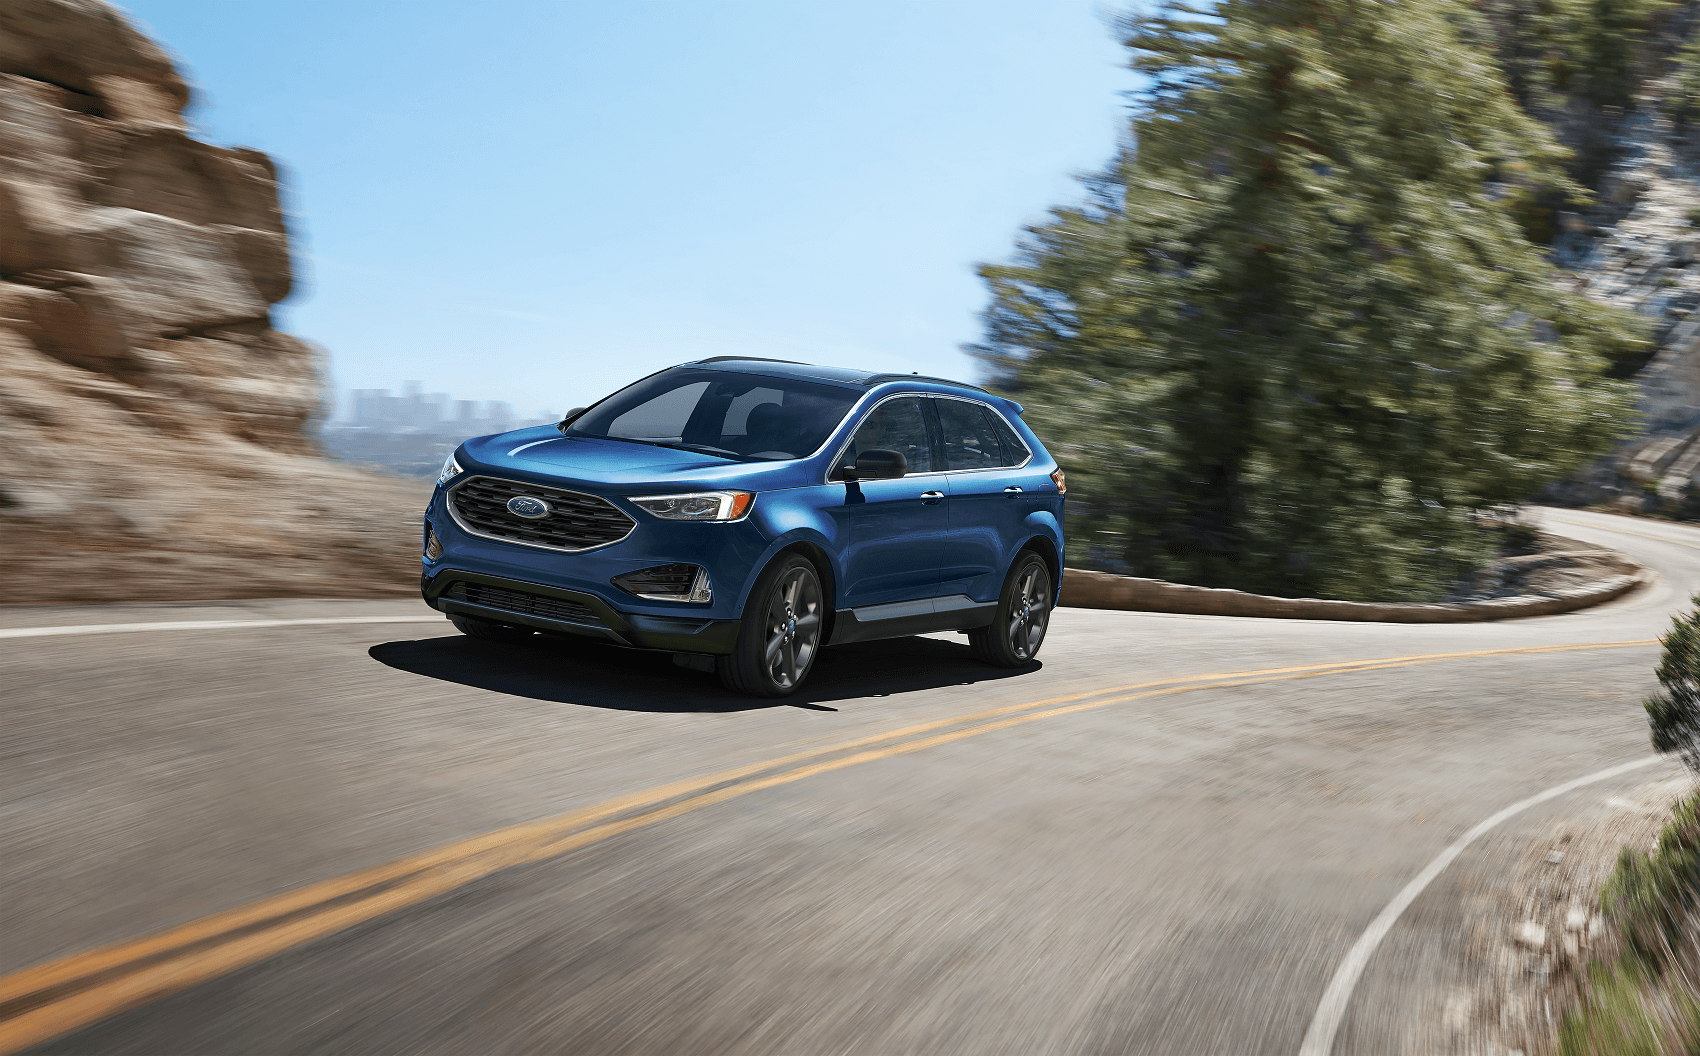 Ford Edge driving up a winding road